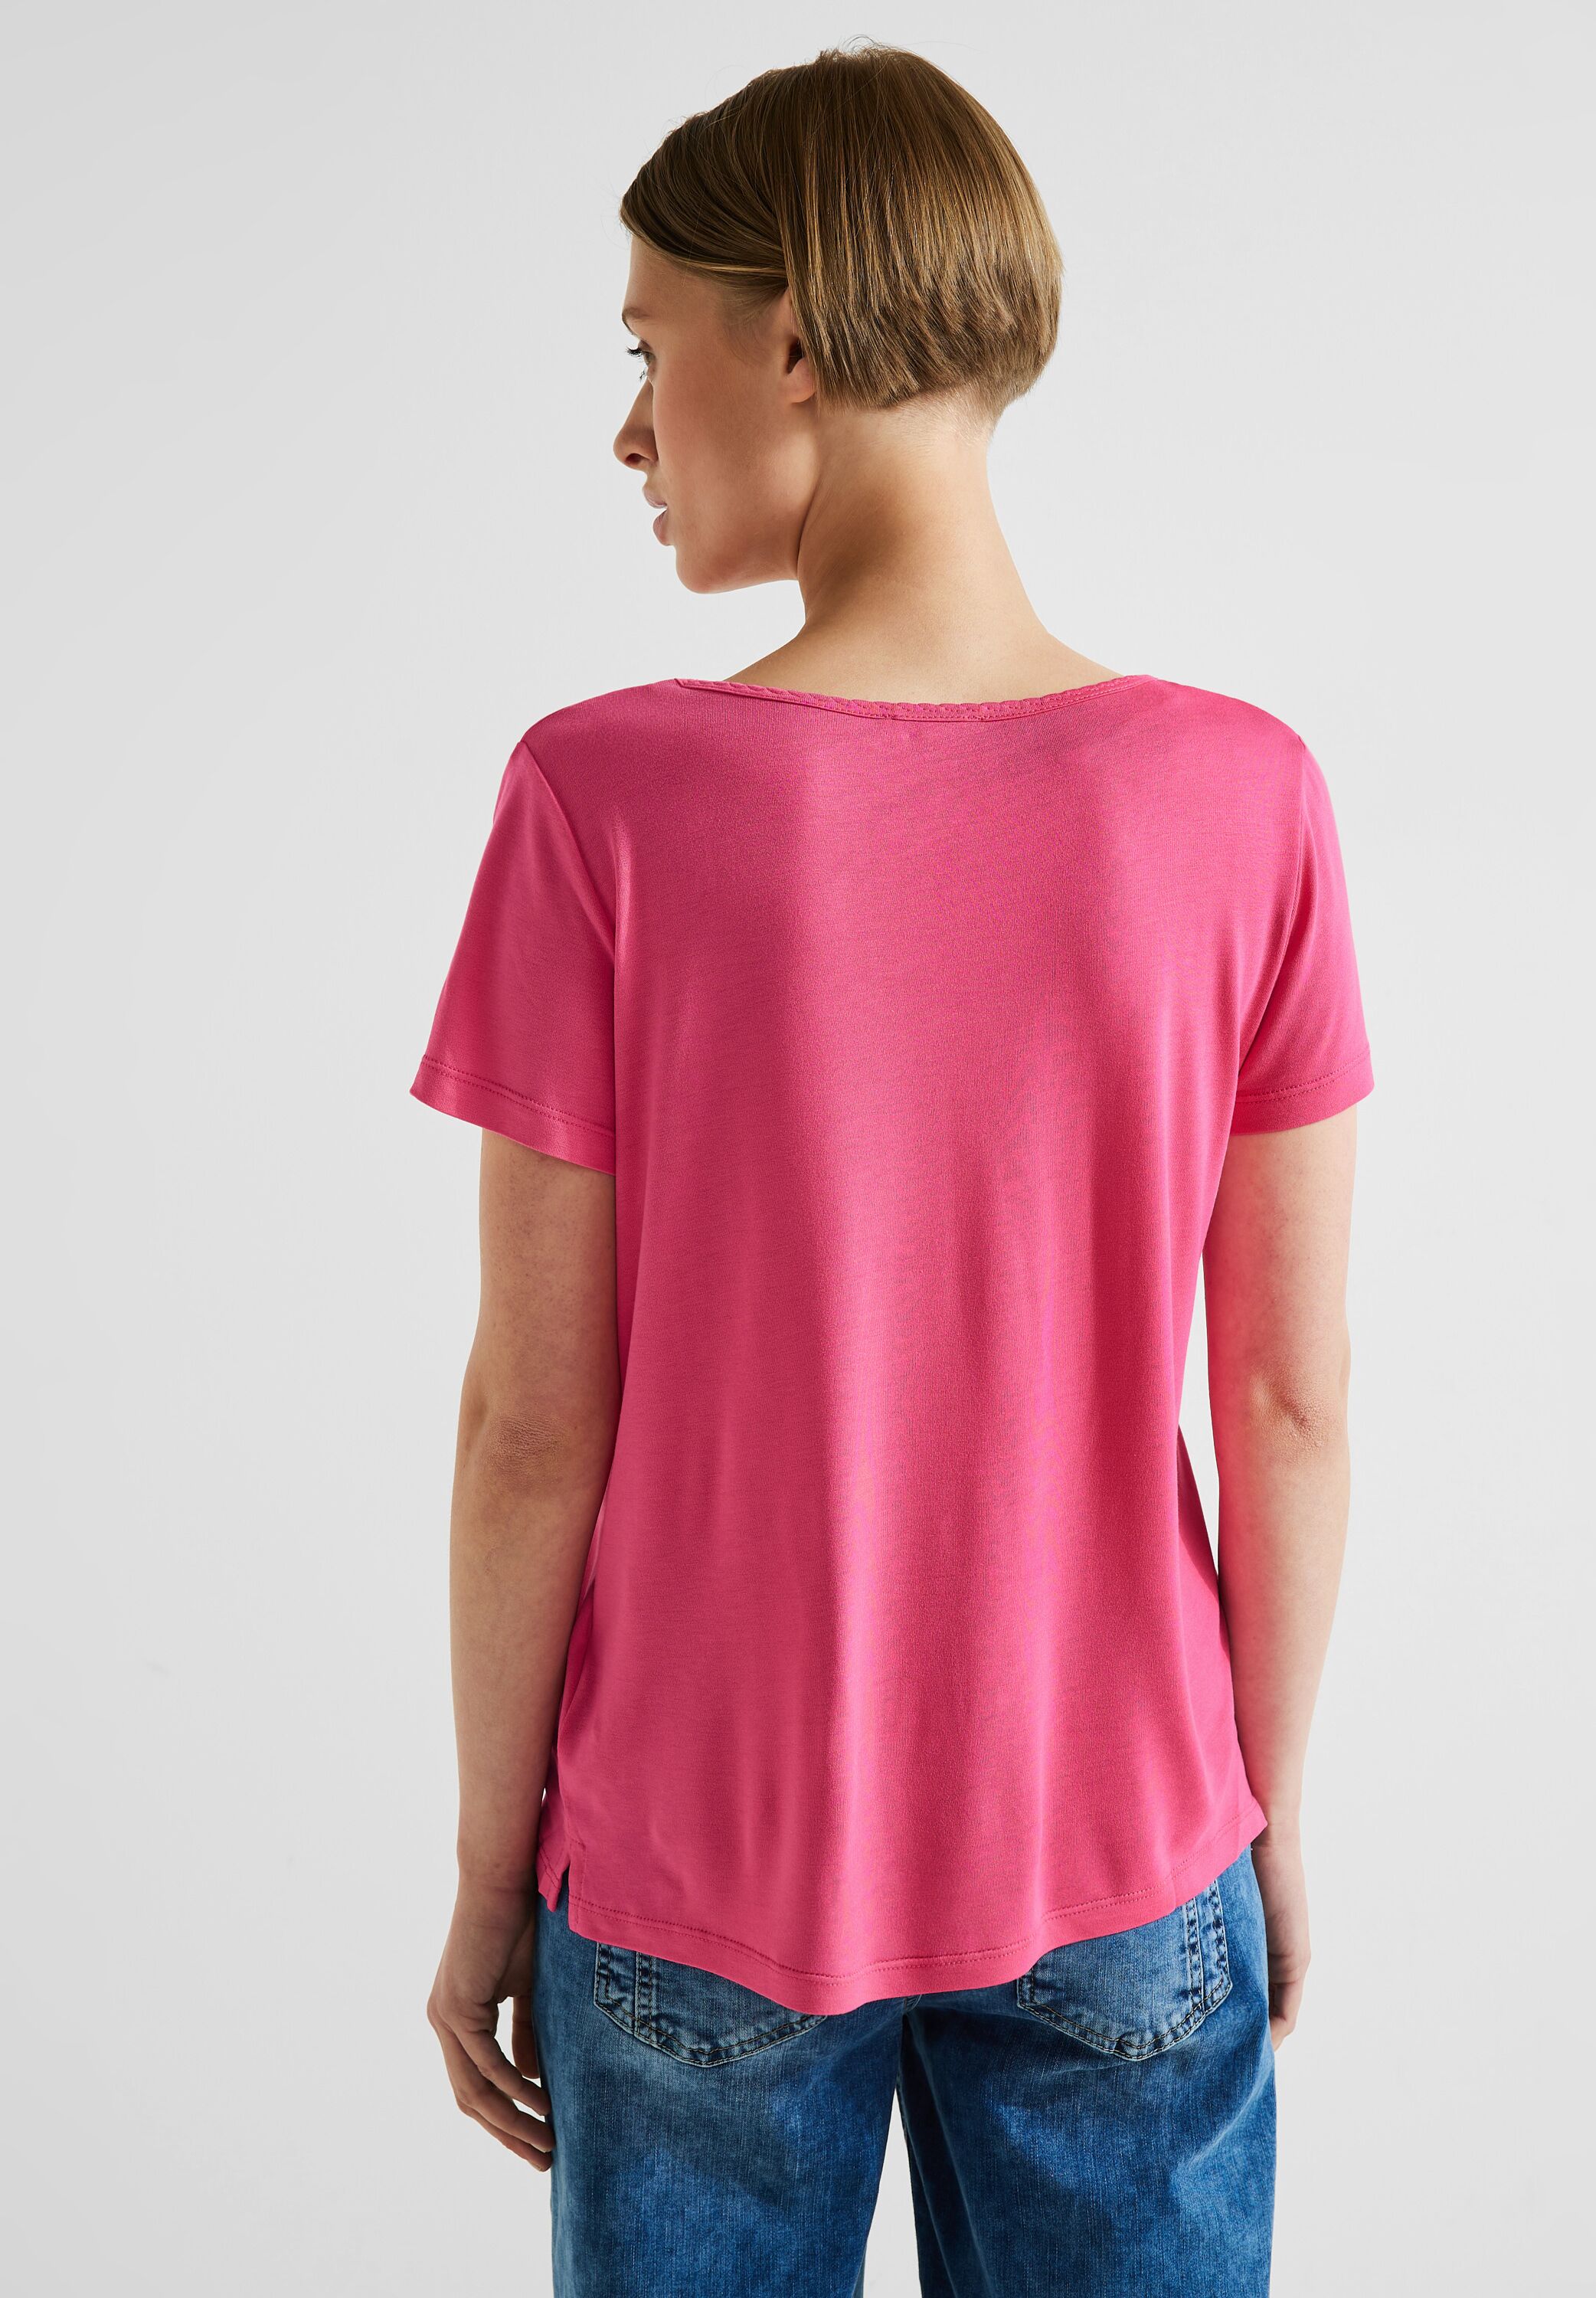 Street One T-Shirt in Berry Rose im SALE reduziert A320124-14647 - CONCEPT  Mode